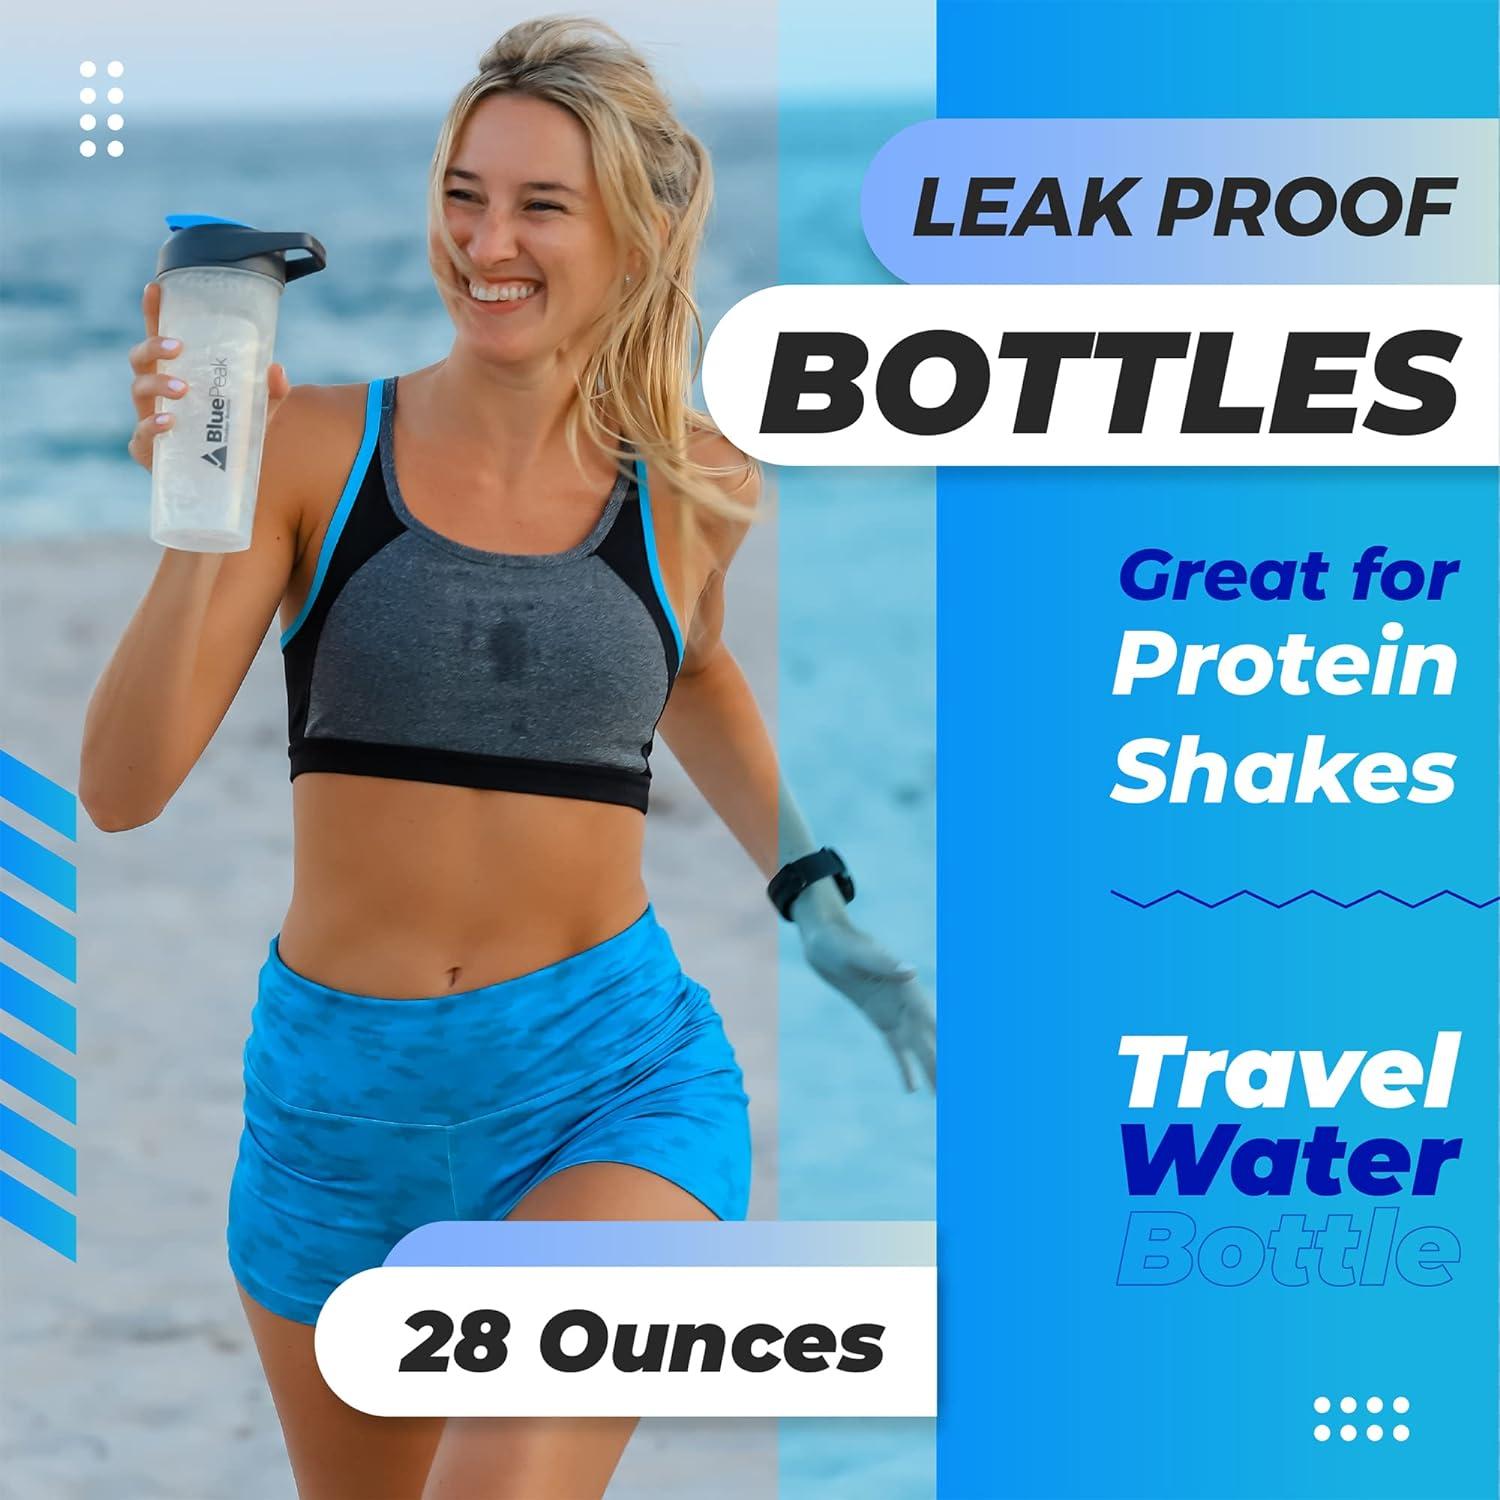 BluePeak Protein Shaker Bottle 20 oz with Dual Mixing Technology, Strong  Loop Top, BPA Free, Shaker